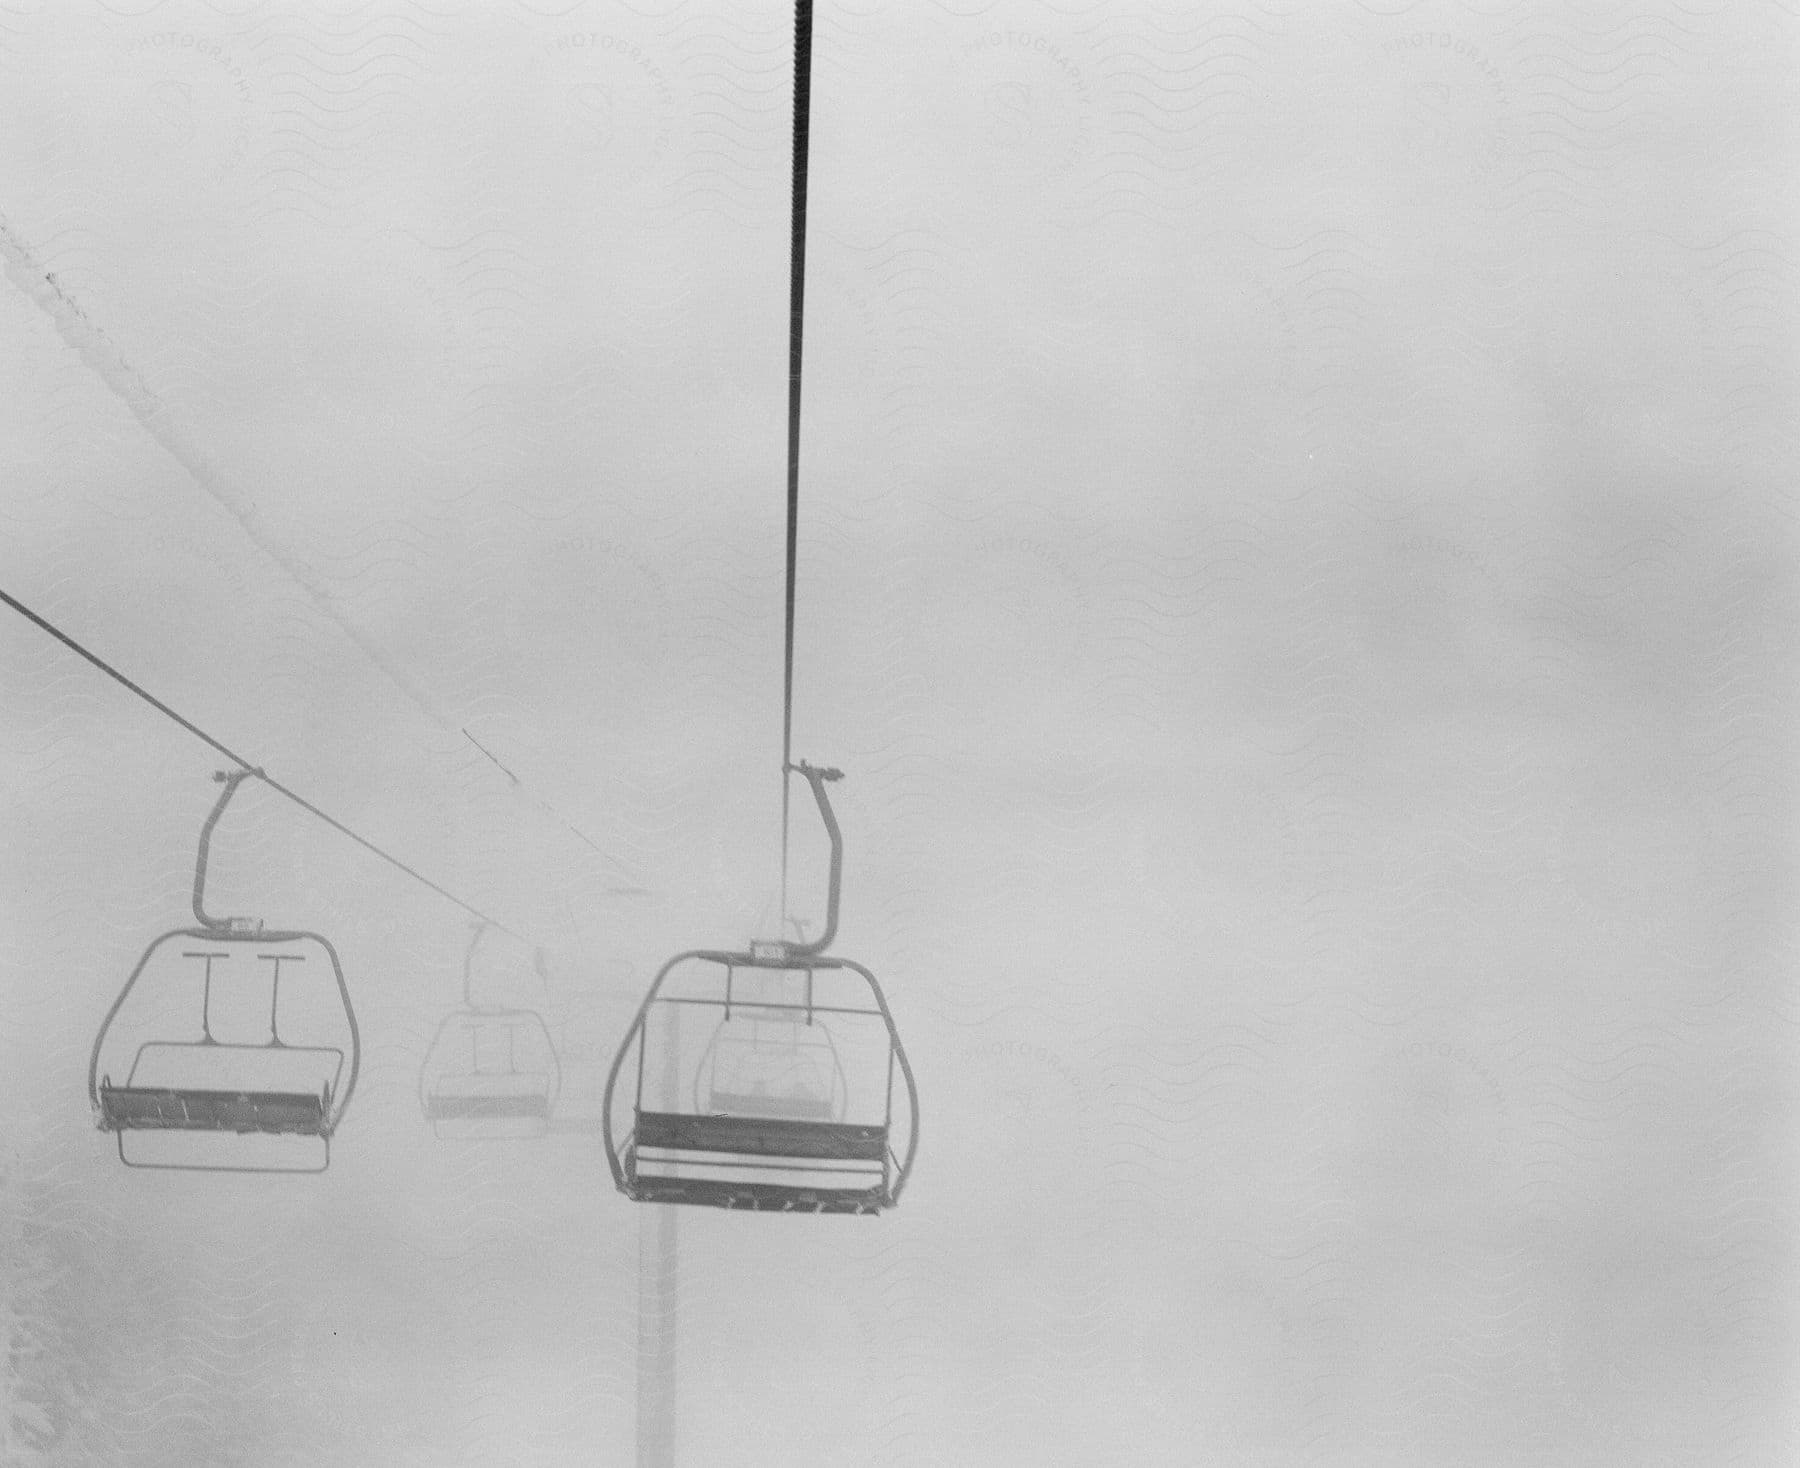 Ski lifts covered by snowy fog in black and white